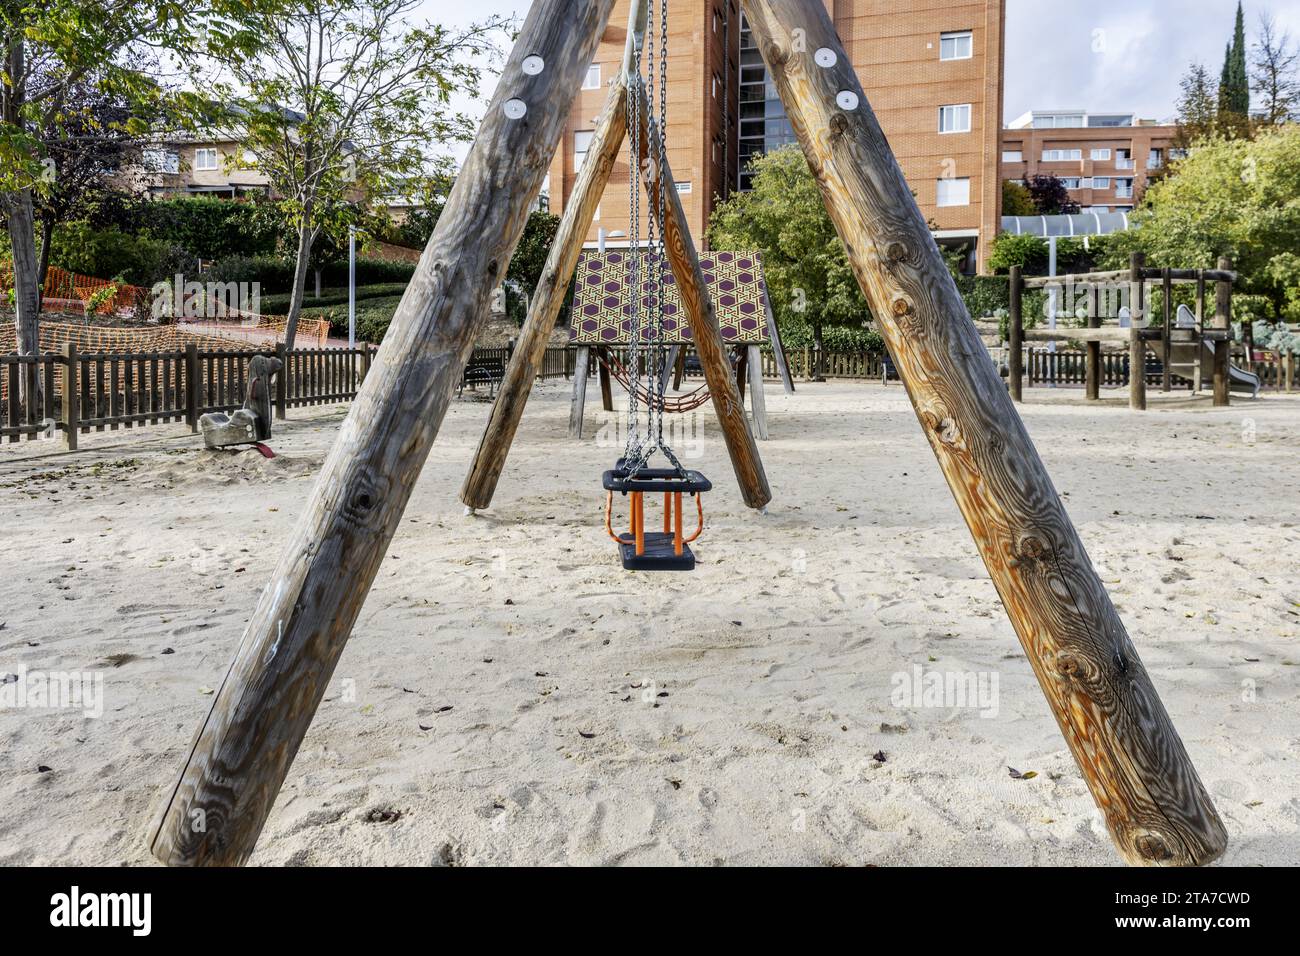 An urban playground with swings and slides on a sandy floor Stock Photo